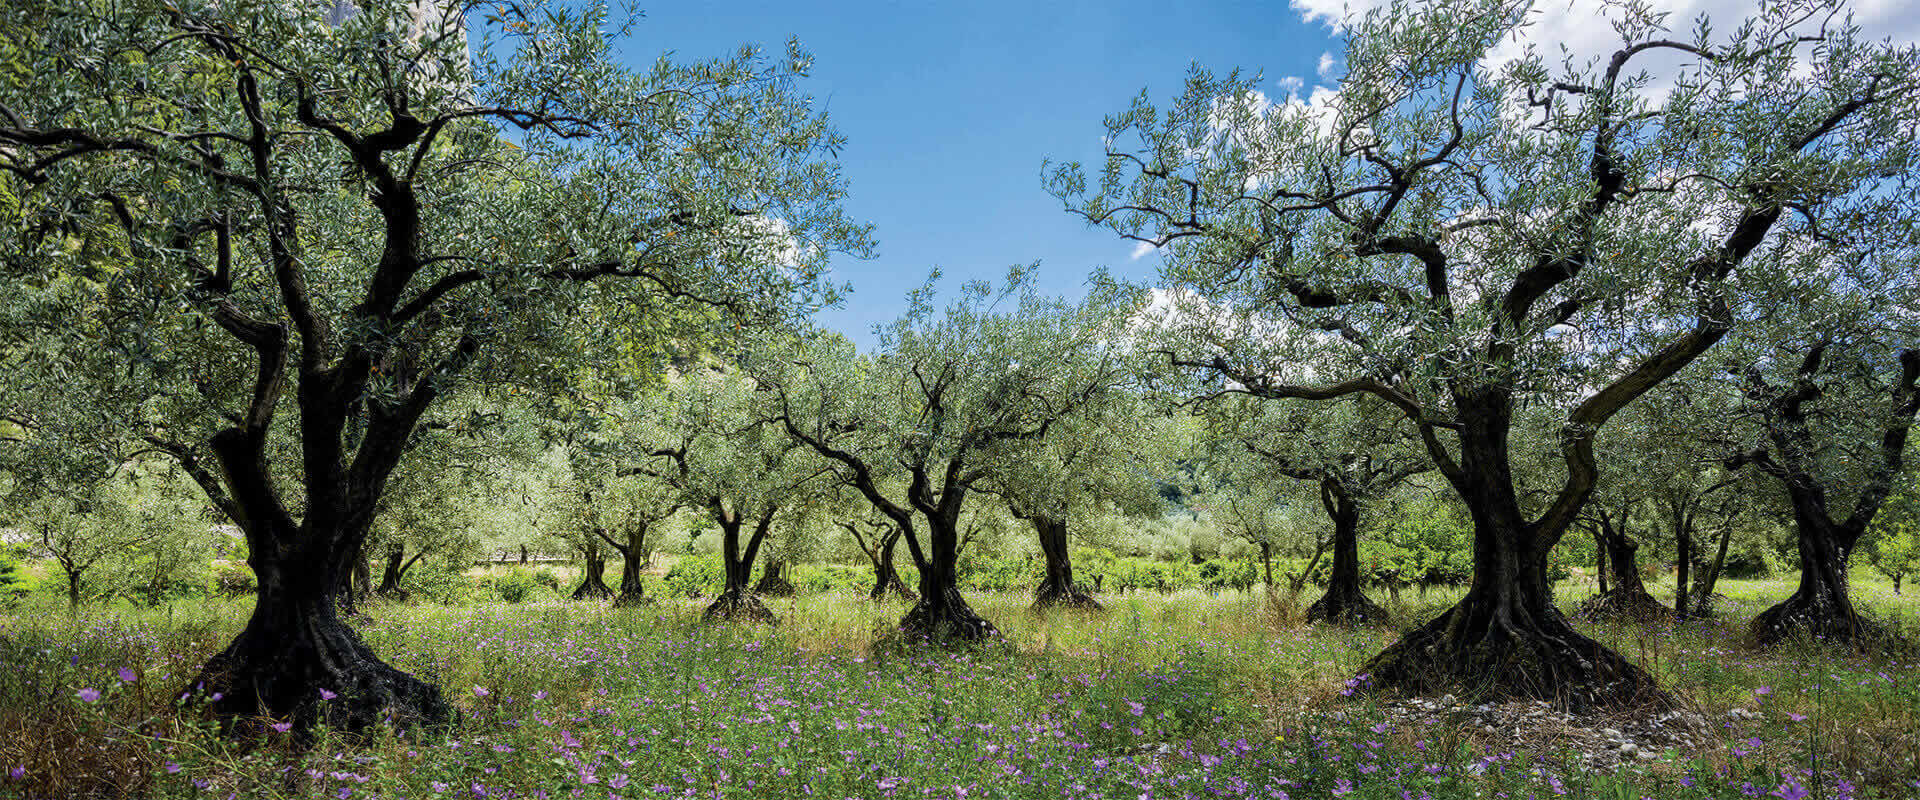 Olive Tree: How to Plant, Grow, and Care for Olive Trees